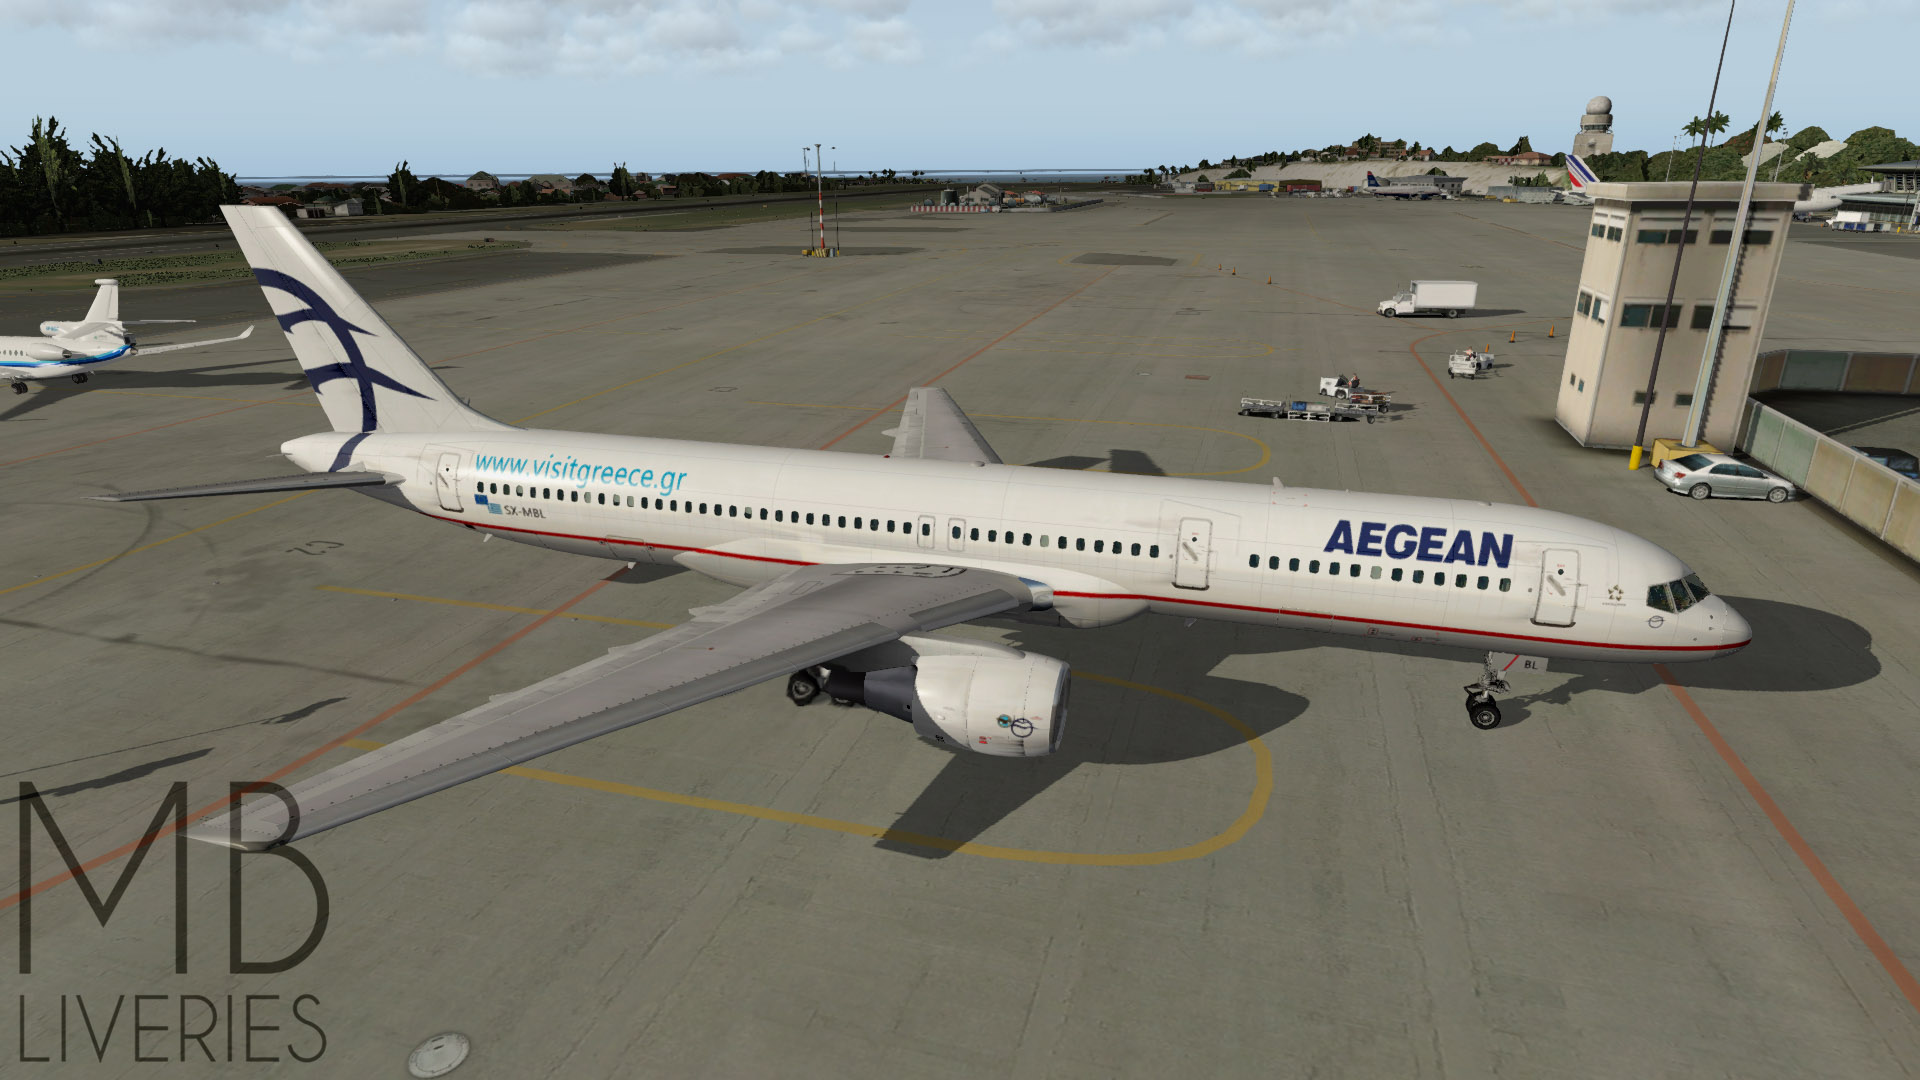 More information about "Aegean - Boeing 757-200RR/PW"